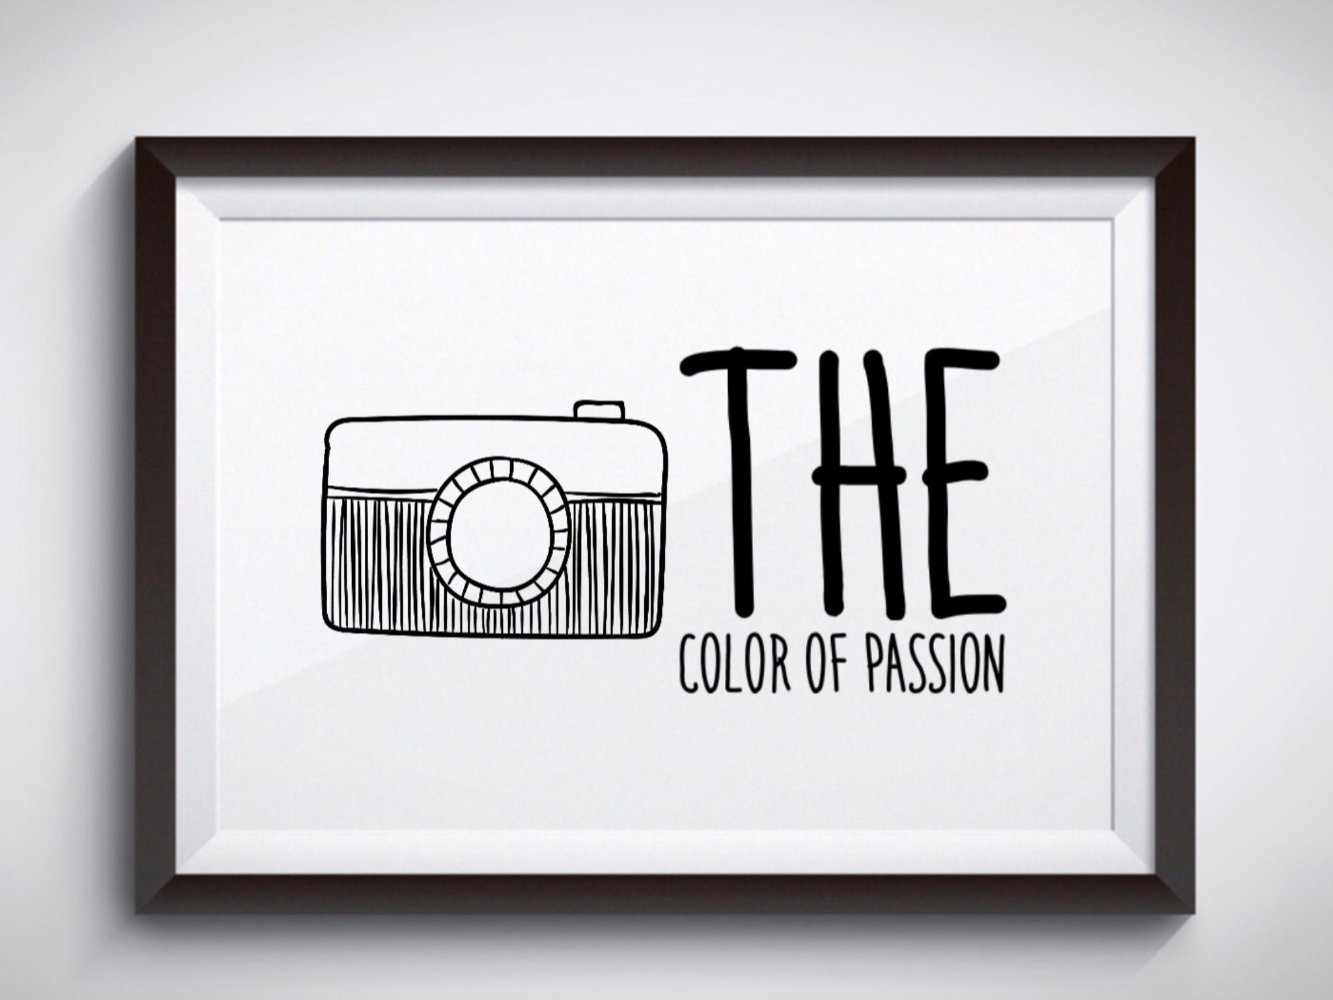 The Color of Passion (2017)